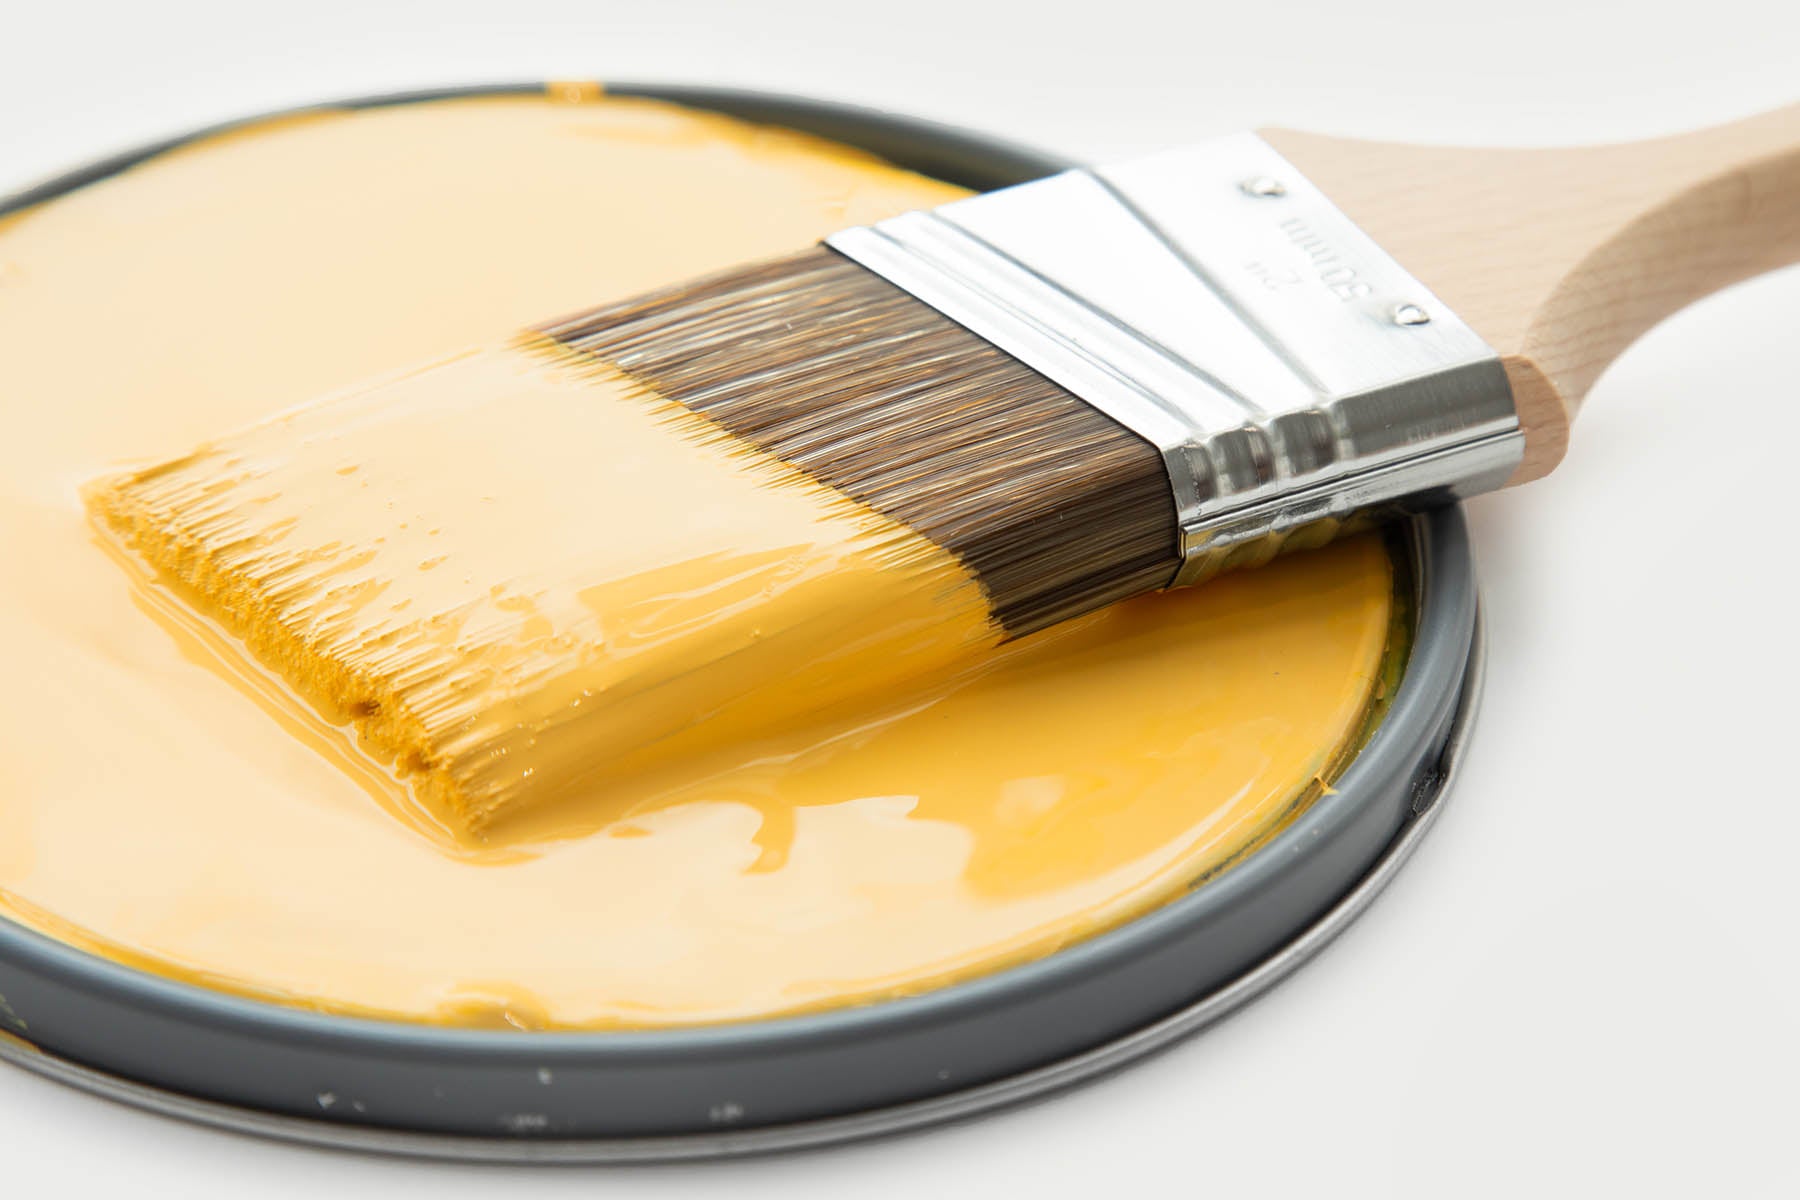 Learn how to properly store leftover interior paint and how and where to safely dispose of any paint you no longer need.